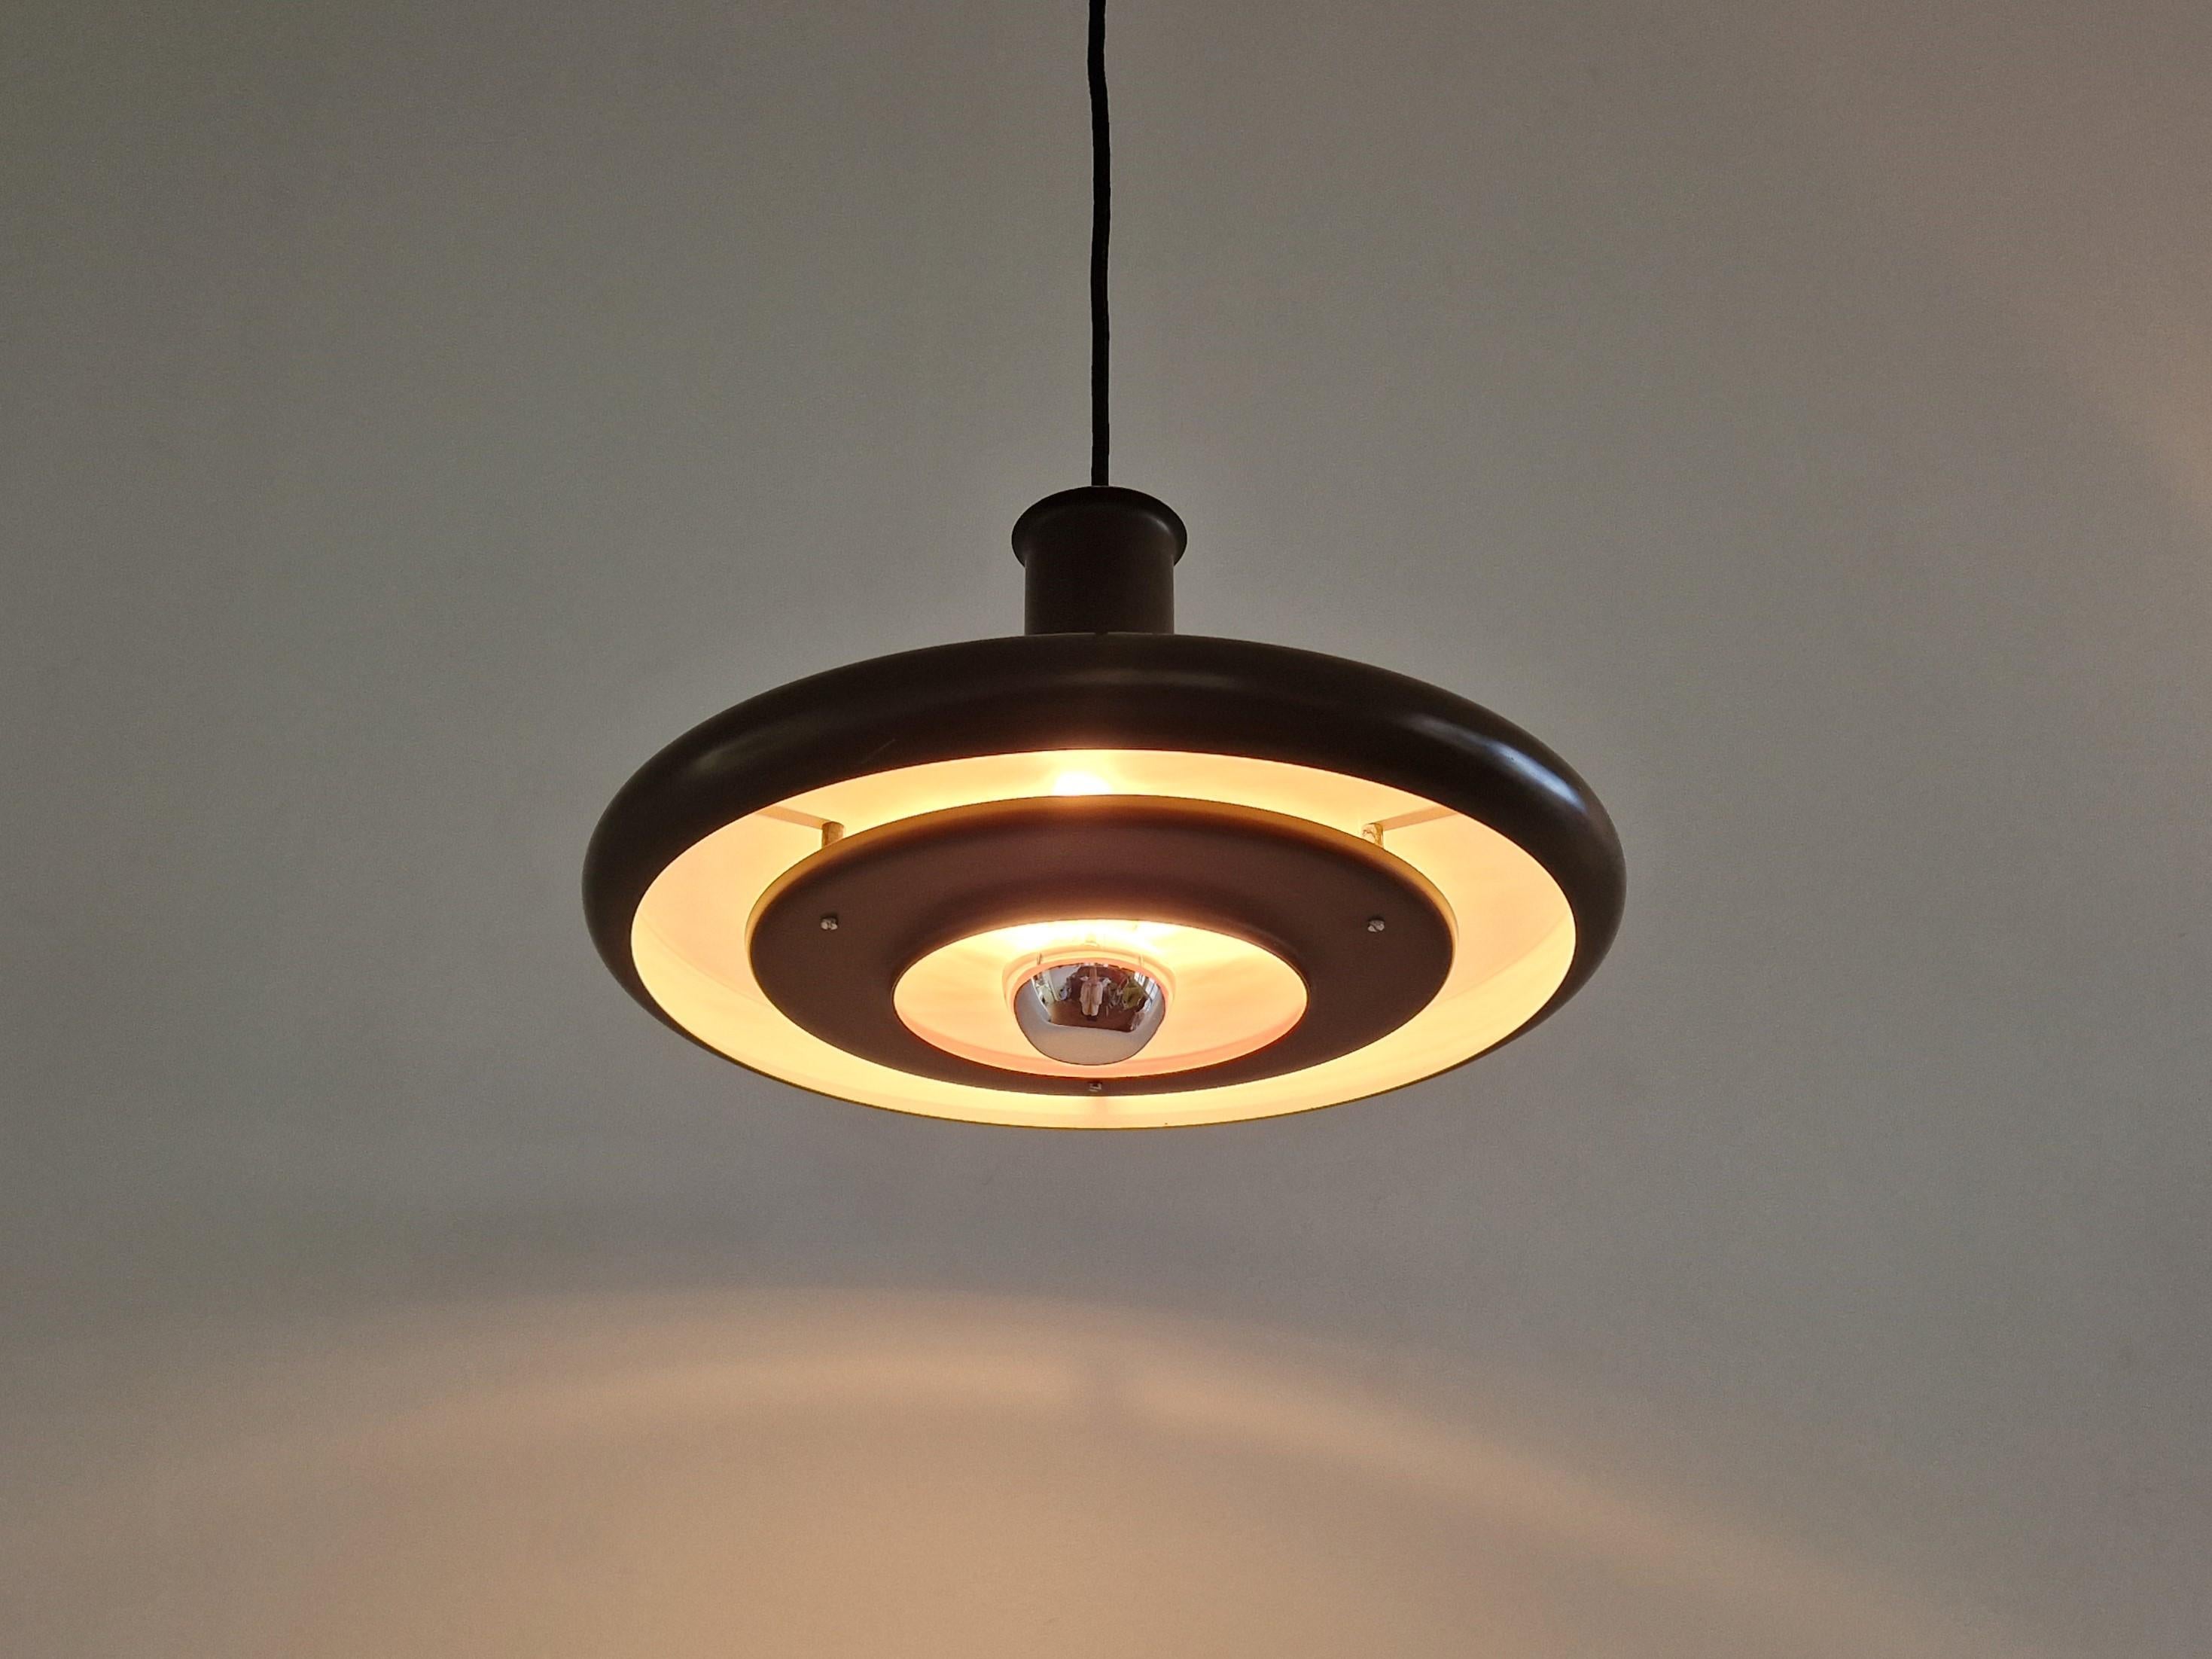 Dark brown Optima pendant lamp by Hans Due for Fog & Mørup, Denmark 1970s In Good Condition For Sale In Steenwijk, NL